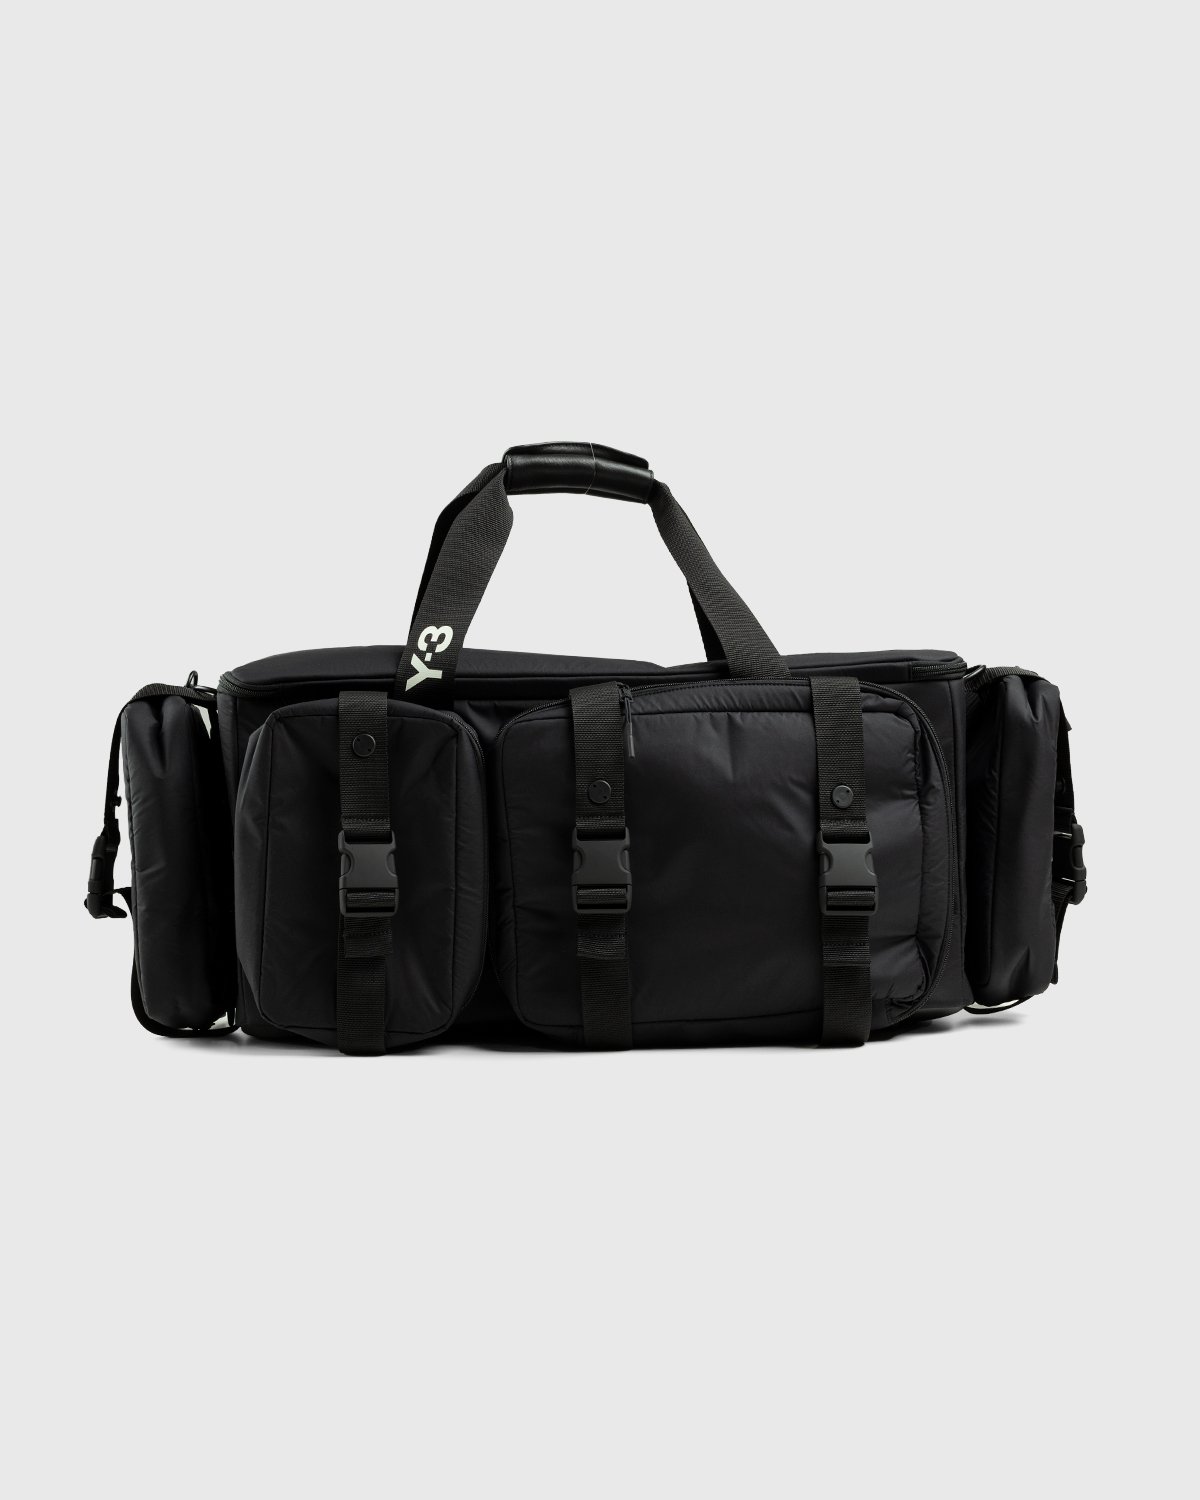 Y-3 - Mobile Archive Hold-All Duffle Bag Black - Accessories - Black - Image 3